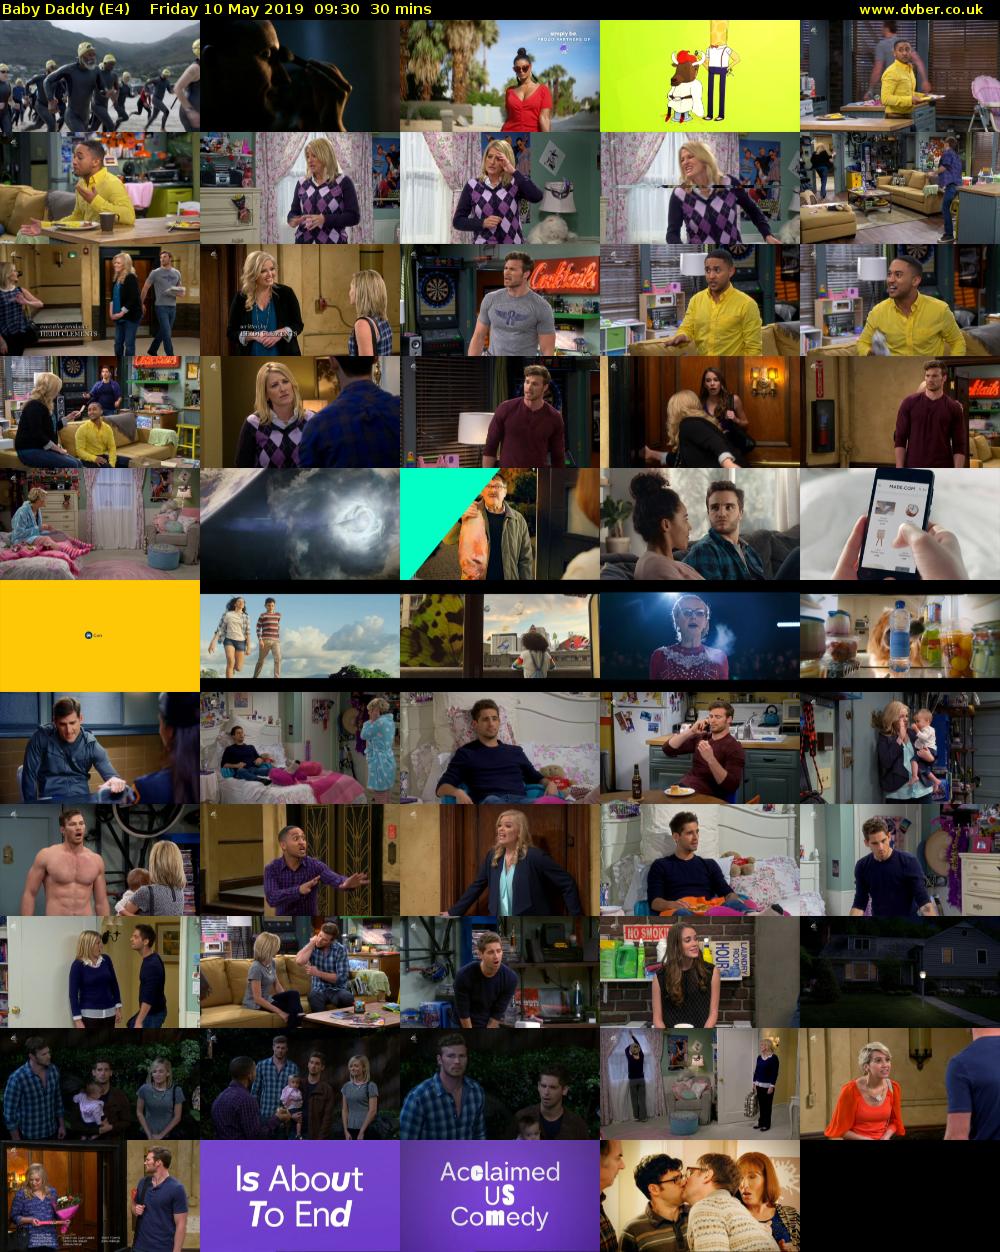 Baby Daddy (E4) Friday 10 May 2019 09:30 - 10:00